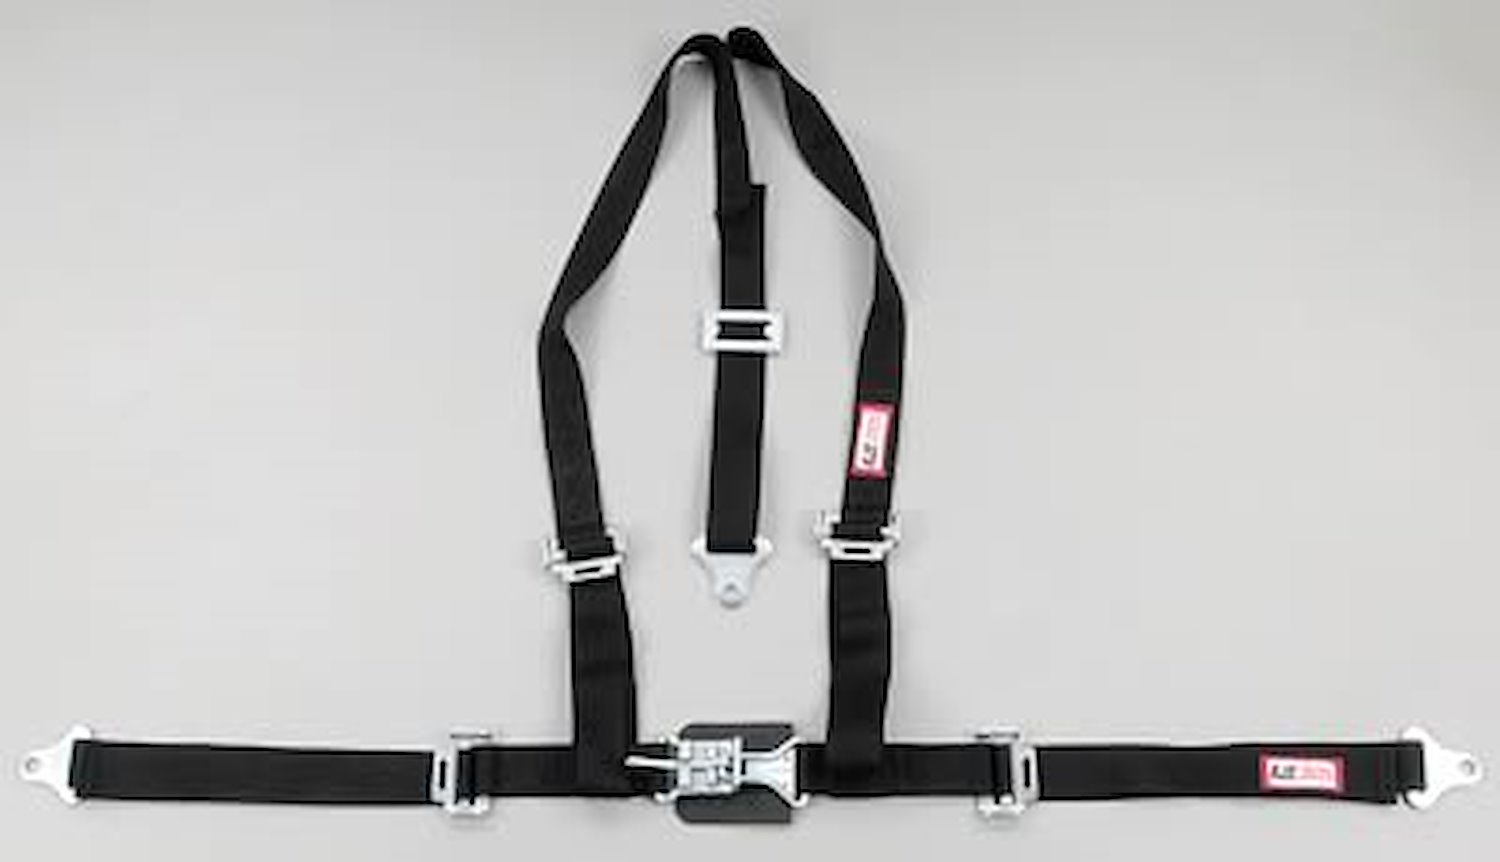 NON-SFI L&L HARNESS 2 PULL UP Lap Belt SNAP SEWN IN 2 S.H. Y FLOOR Mount w/STERNUM STRAP WRAP/BOLT BLACK